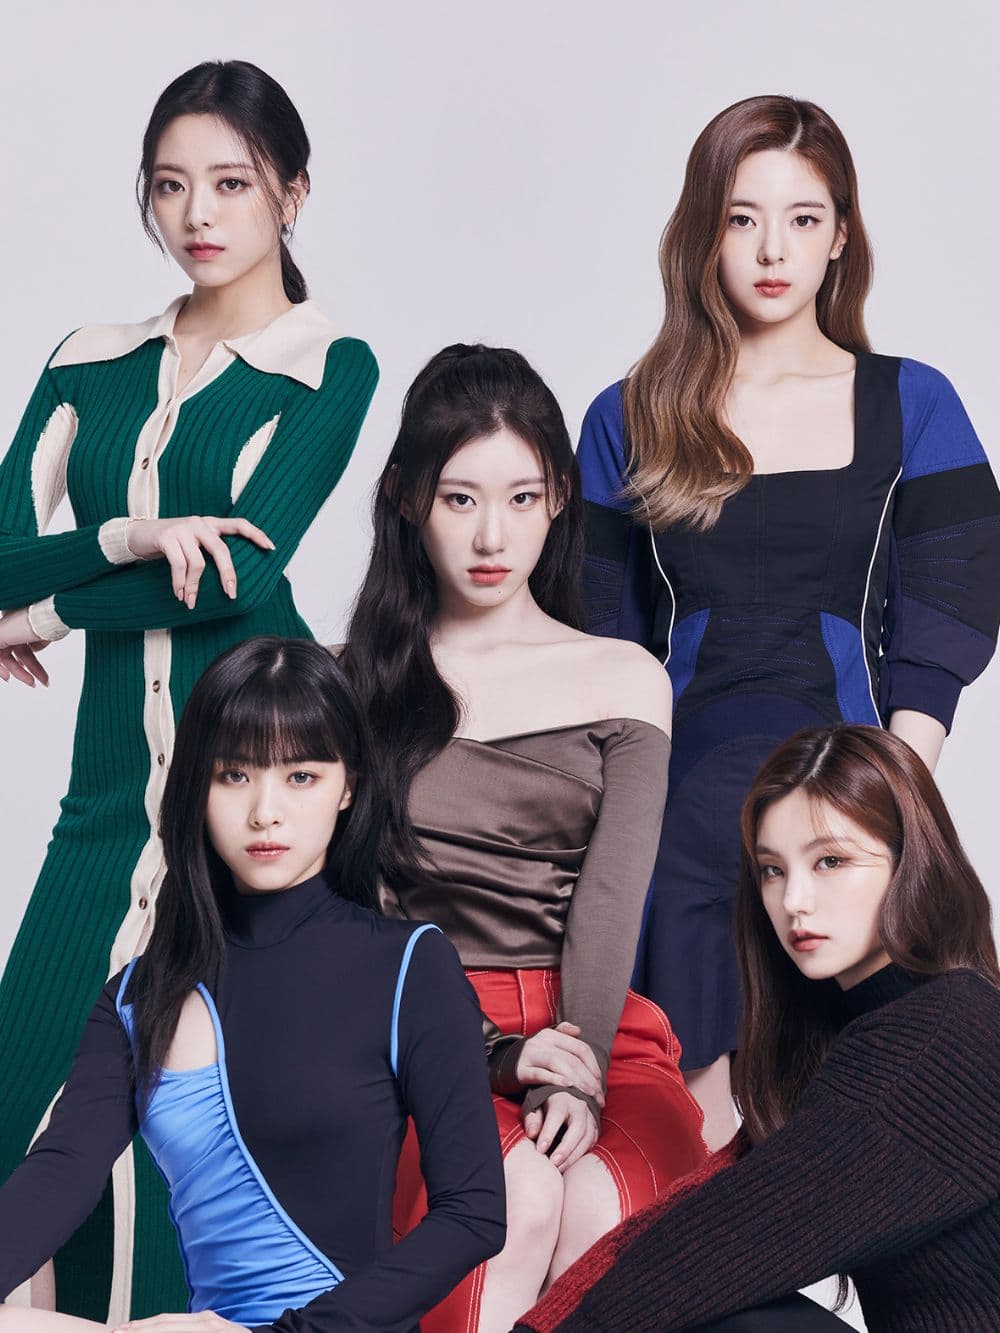 ITZY X CHARLES & KEITH